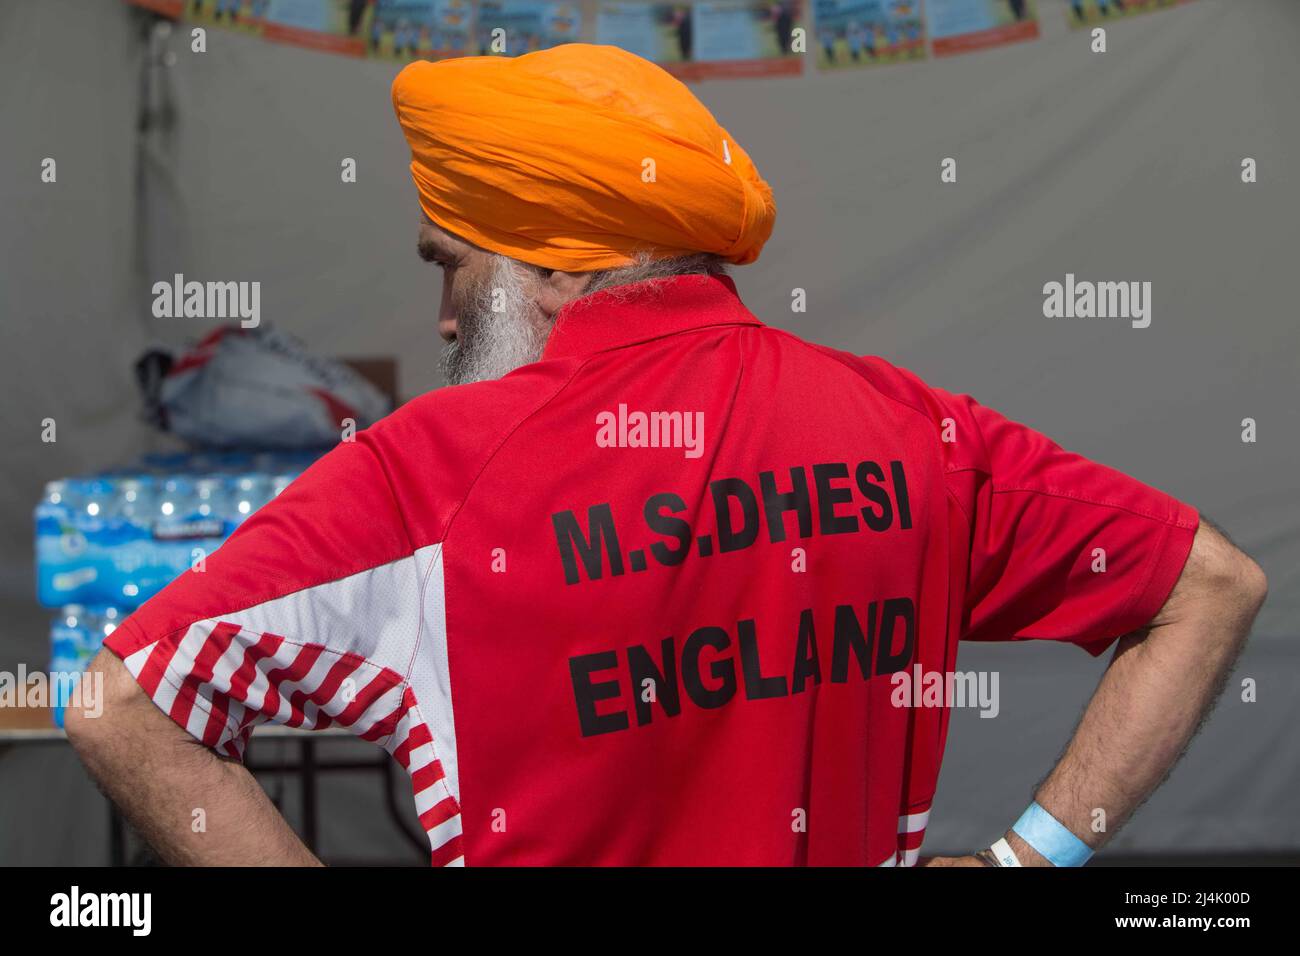 London UK 16 April 2022 Meva Singh Dhesi badminton player for England disable team ,fought for 40 years to make Badminton a Olympic game, his dream was achieved at the last Olympic